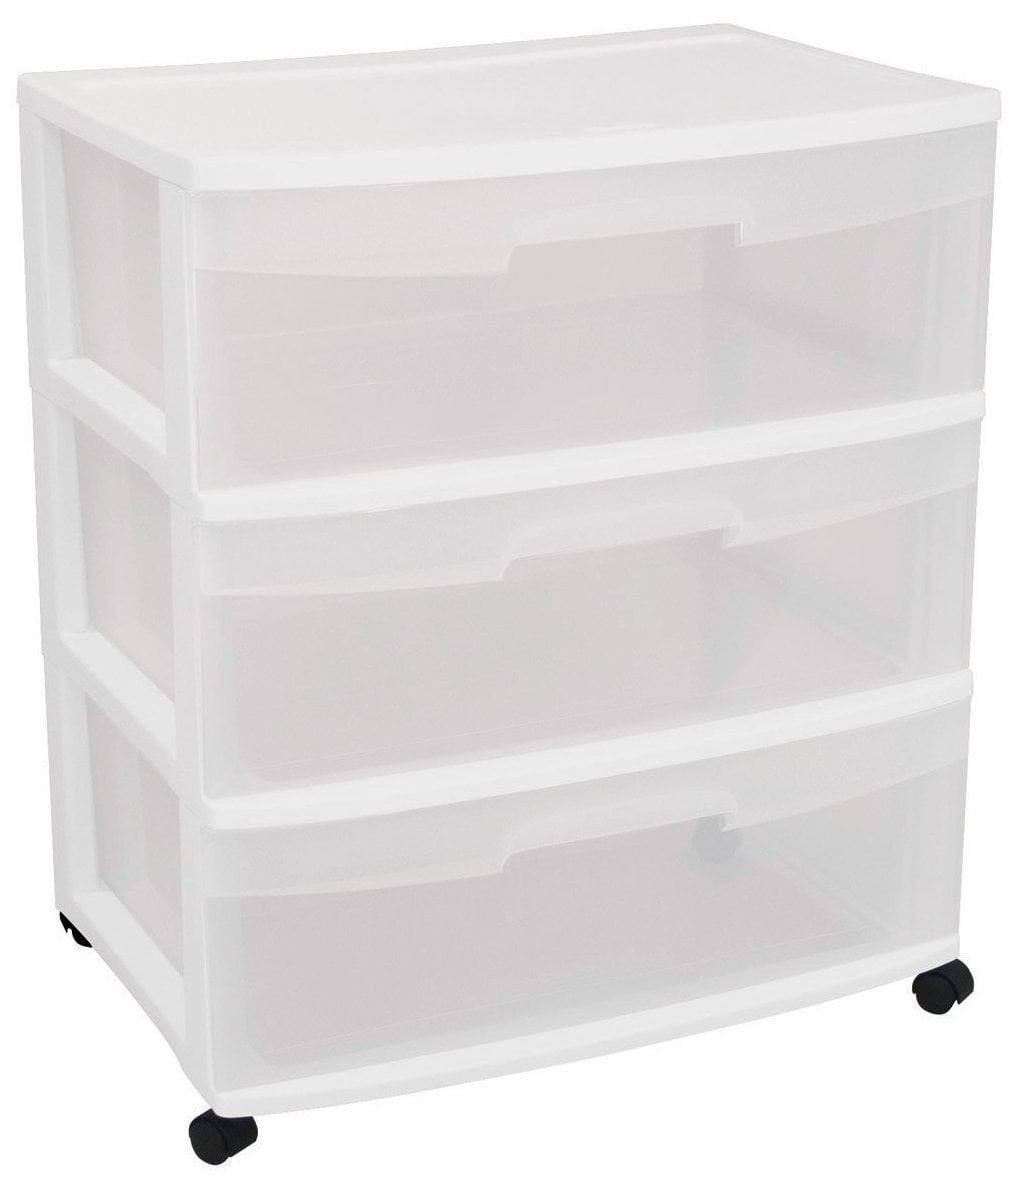 STERILITE 29308001 Wide 3 Drawer Cart White Frame with Clear Drawers and Black Casters 